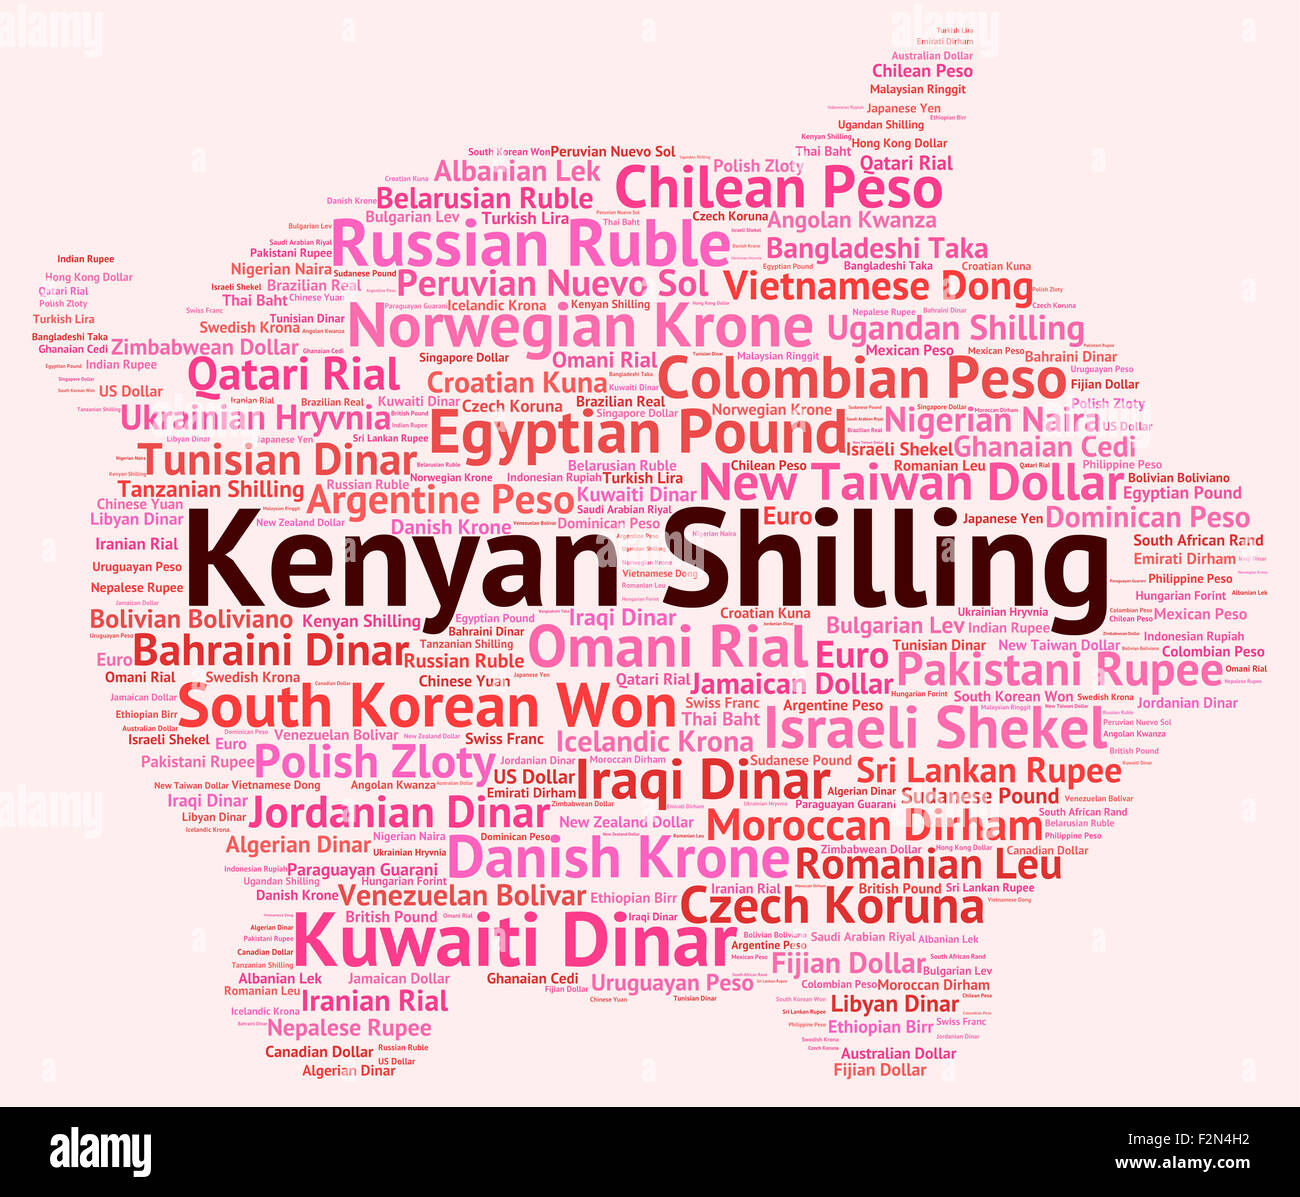 Shilling meaning